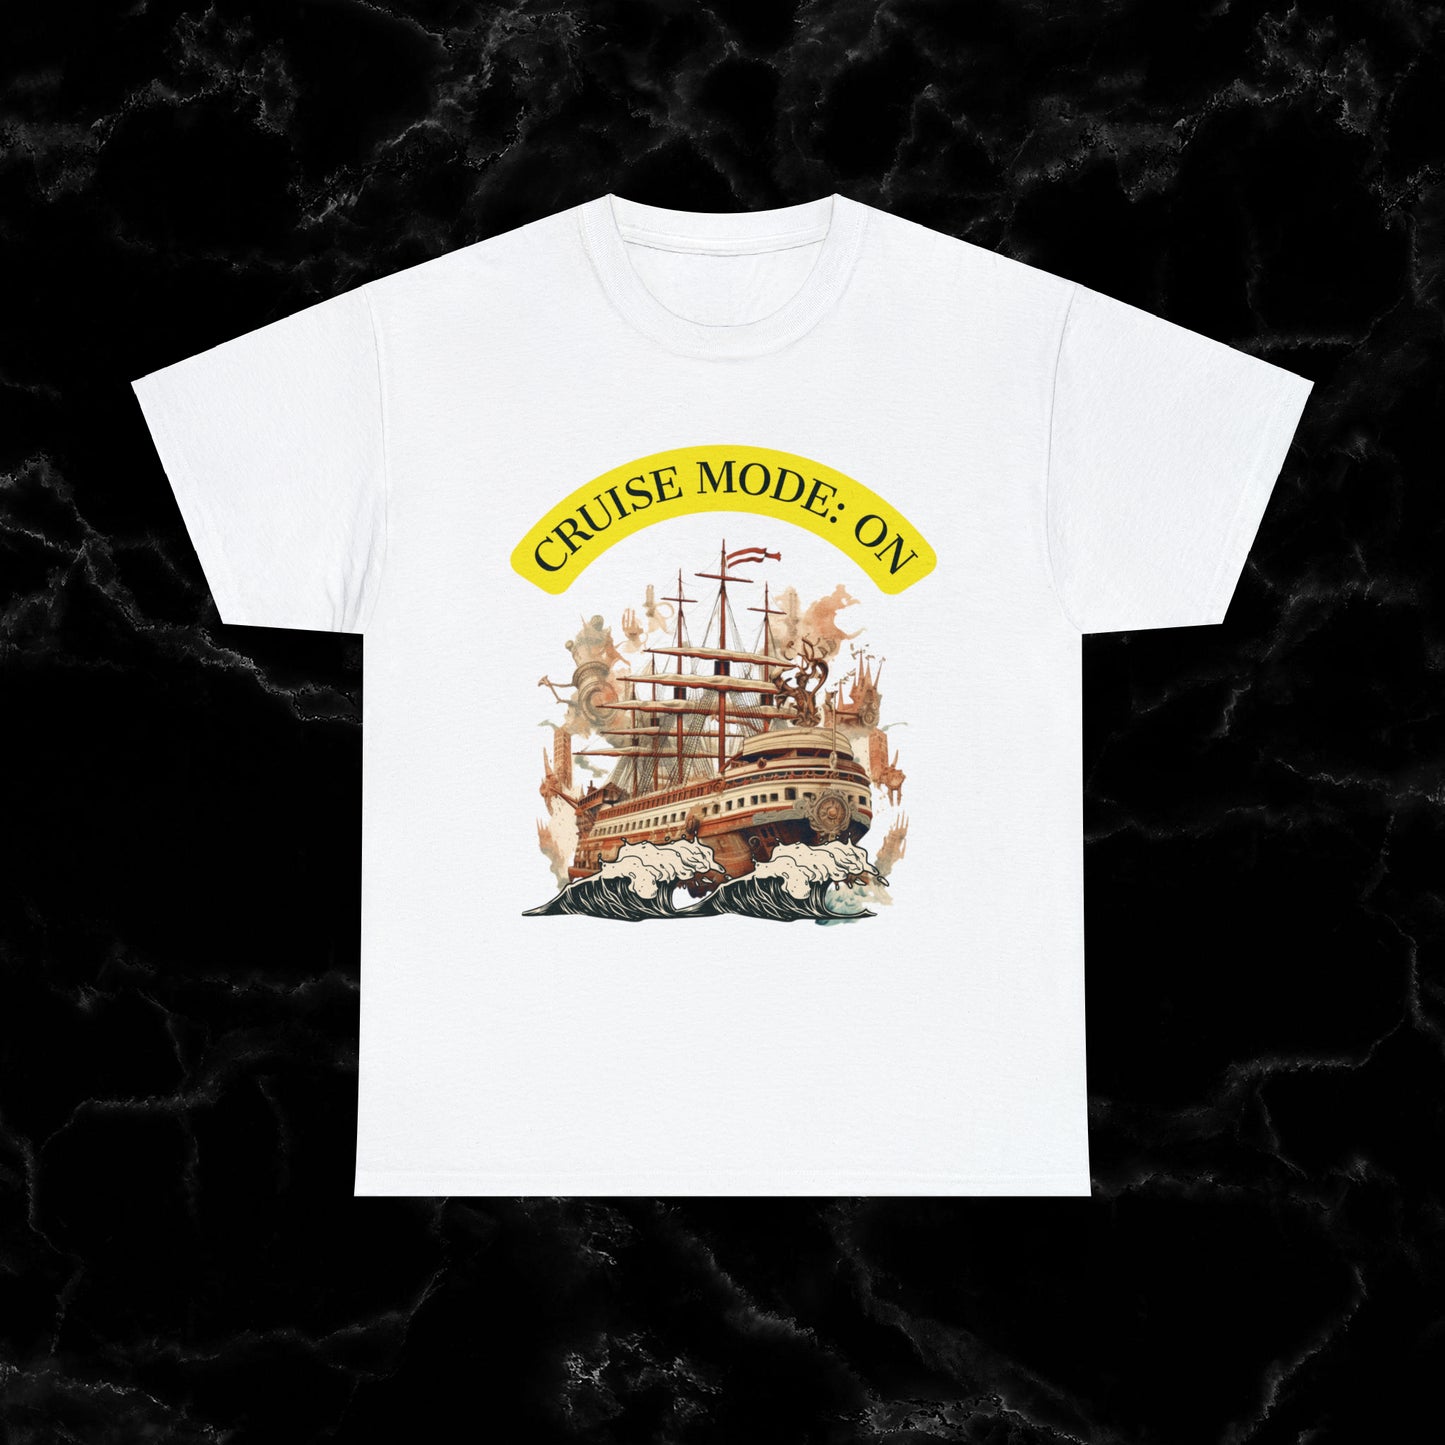 Sail in Style with our Viking Cruise T-Shirt – Cruise Time On, Cruise Mode Activated! T-Shirt White S 